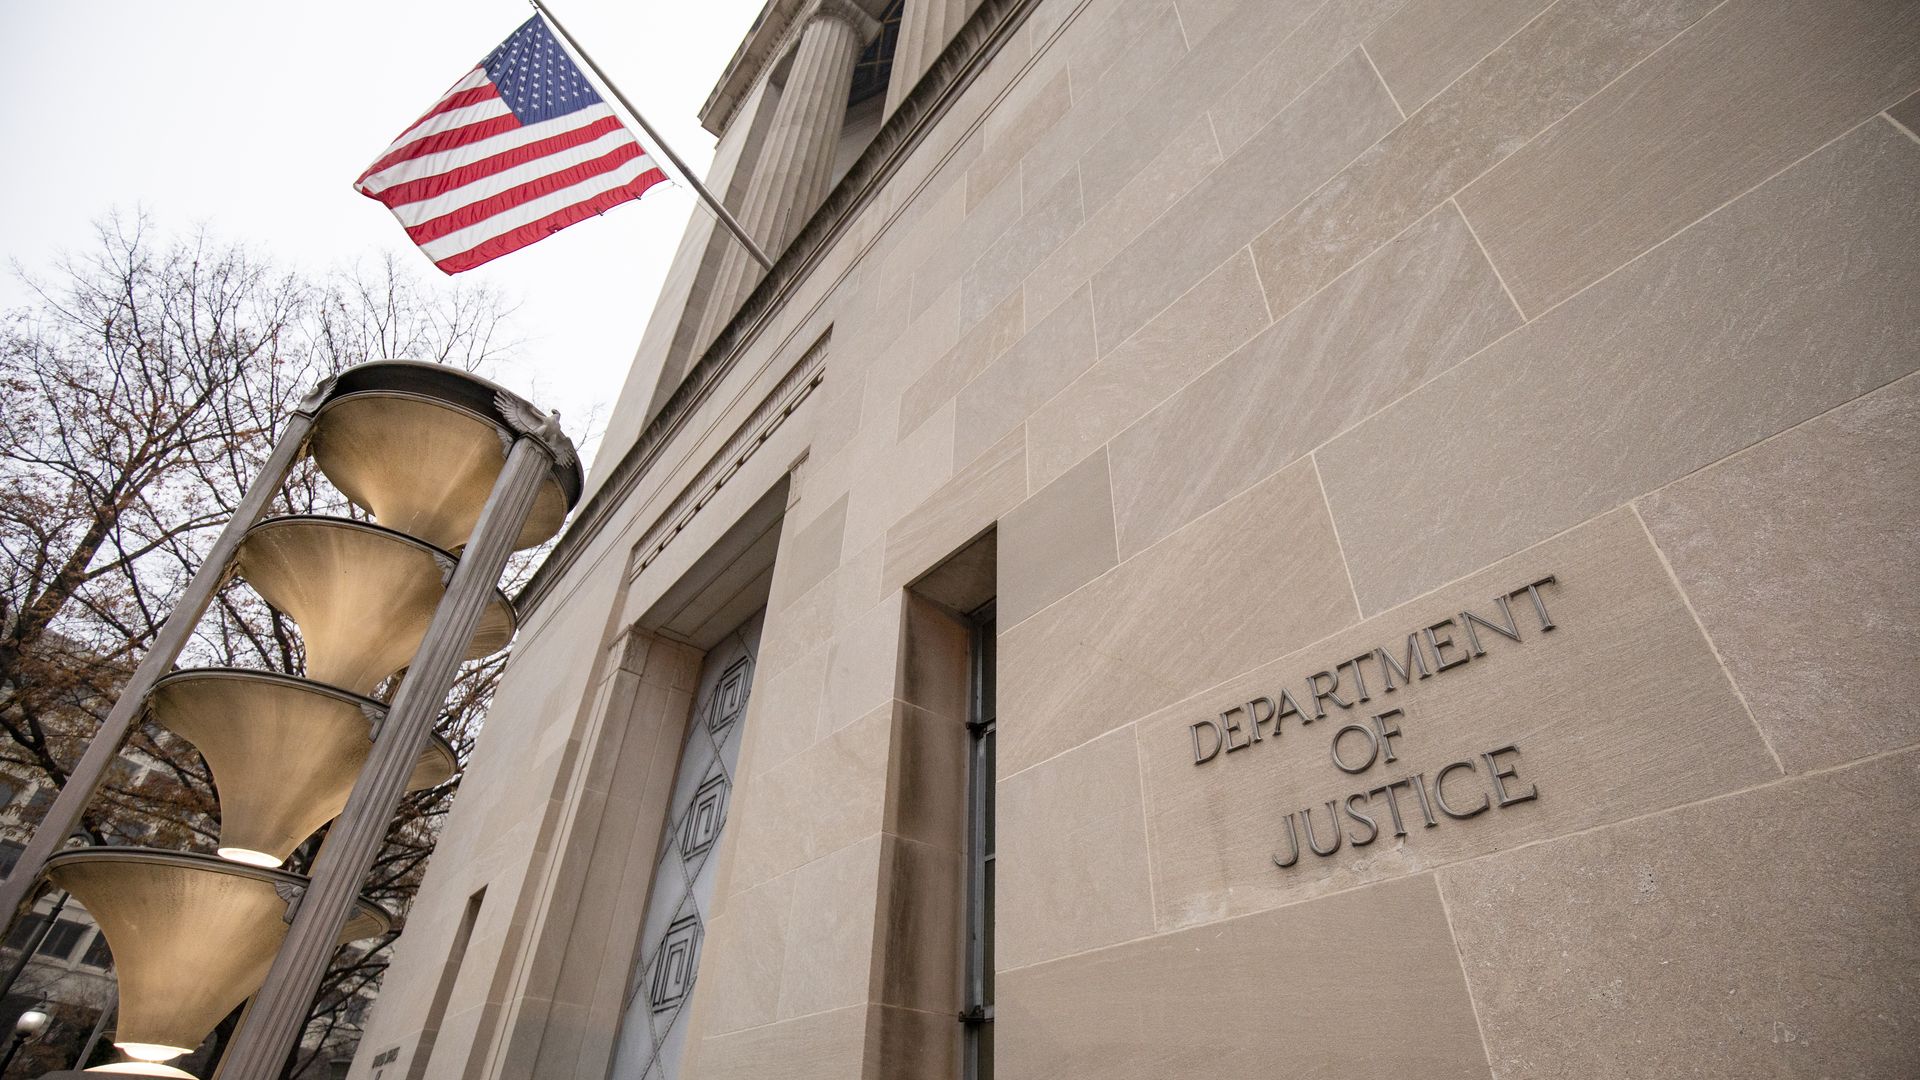 The outside of the Department of Justice building.